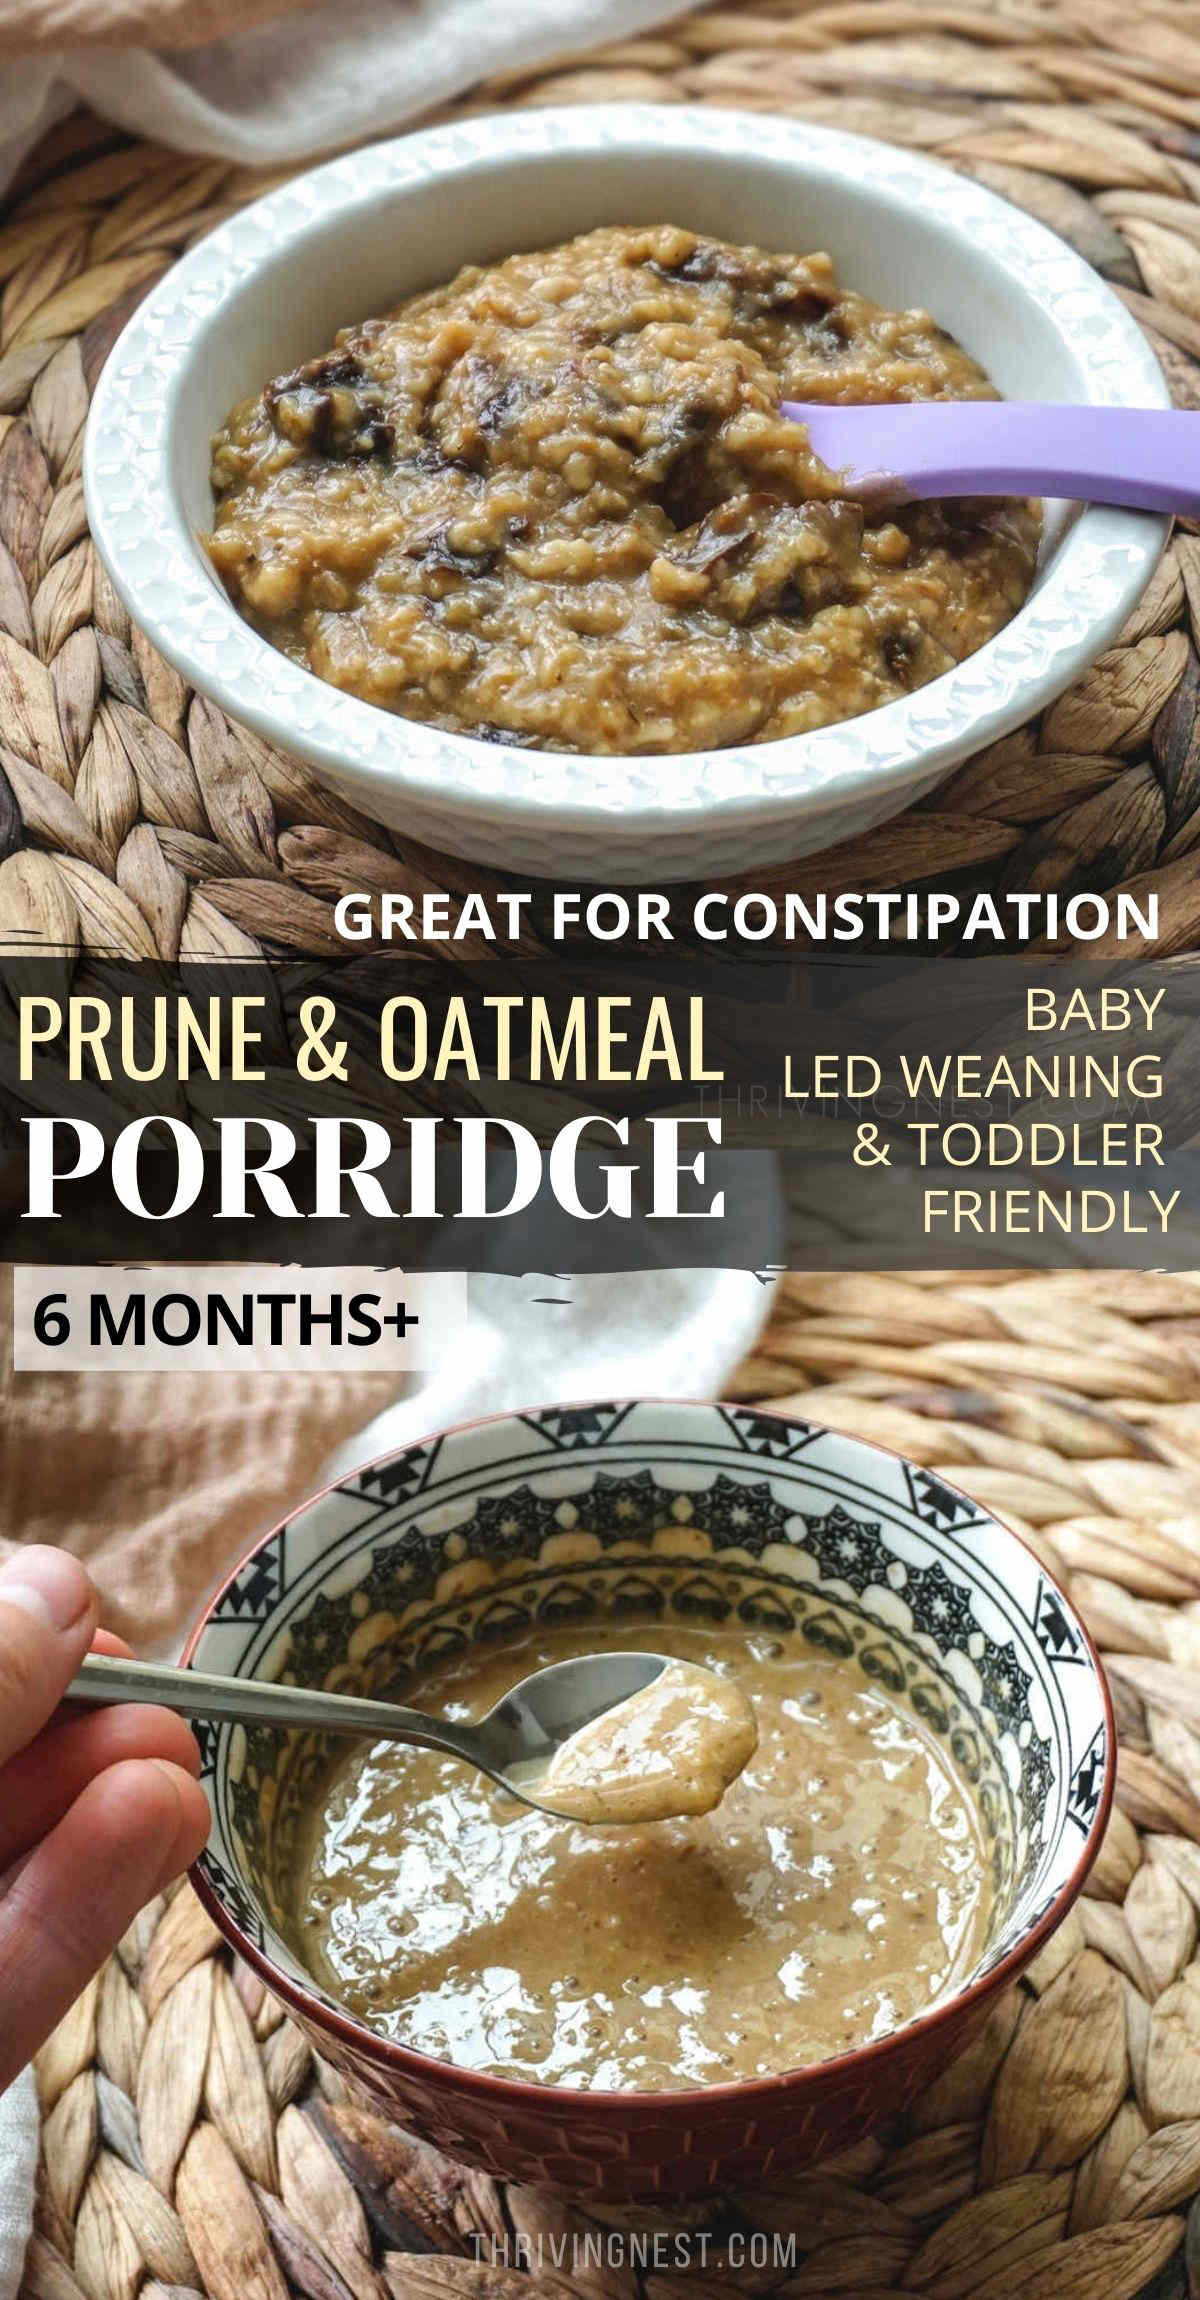 Baby oat porridge - a delicious breakfast or meal that can be served for toddlers, older kids or even babies from 6 months.